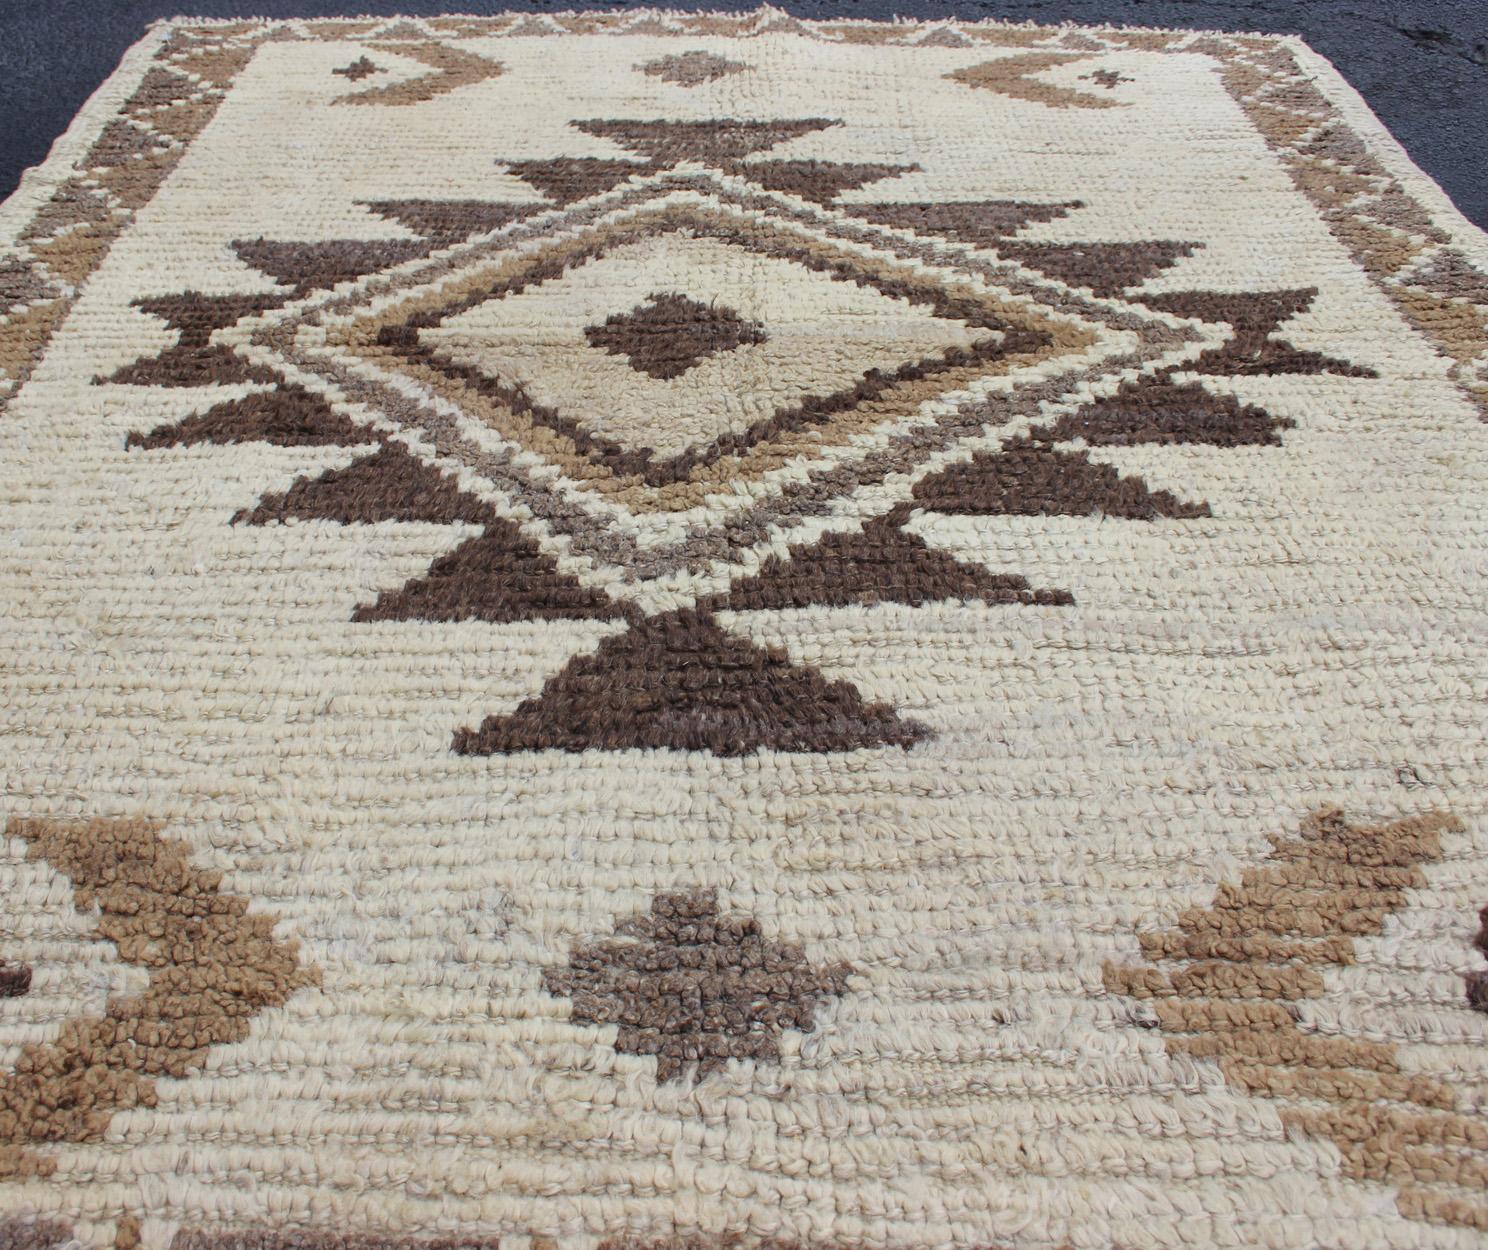 Natural Colors Turkish Tulu Carpet with Tribal Design in Shades of Earth Tones For Sale 2